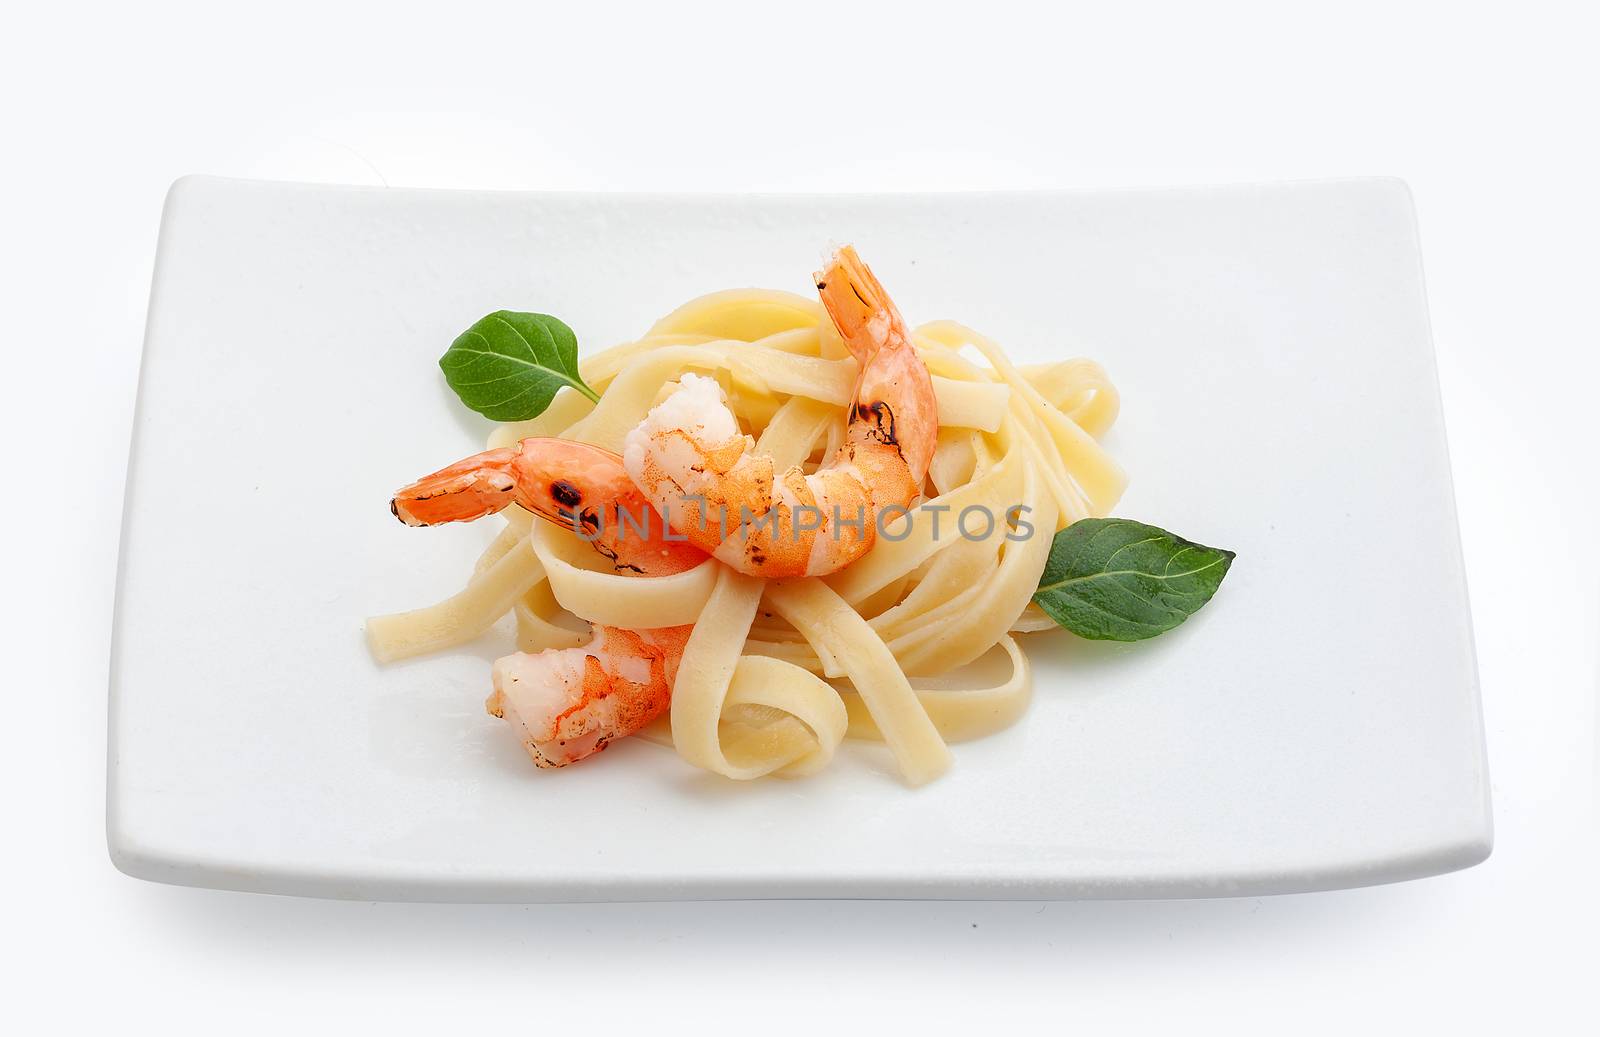 Roasted shrimps with pasta on the plate